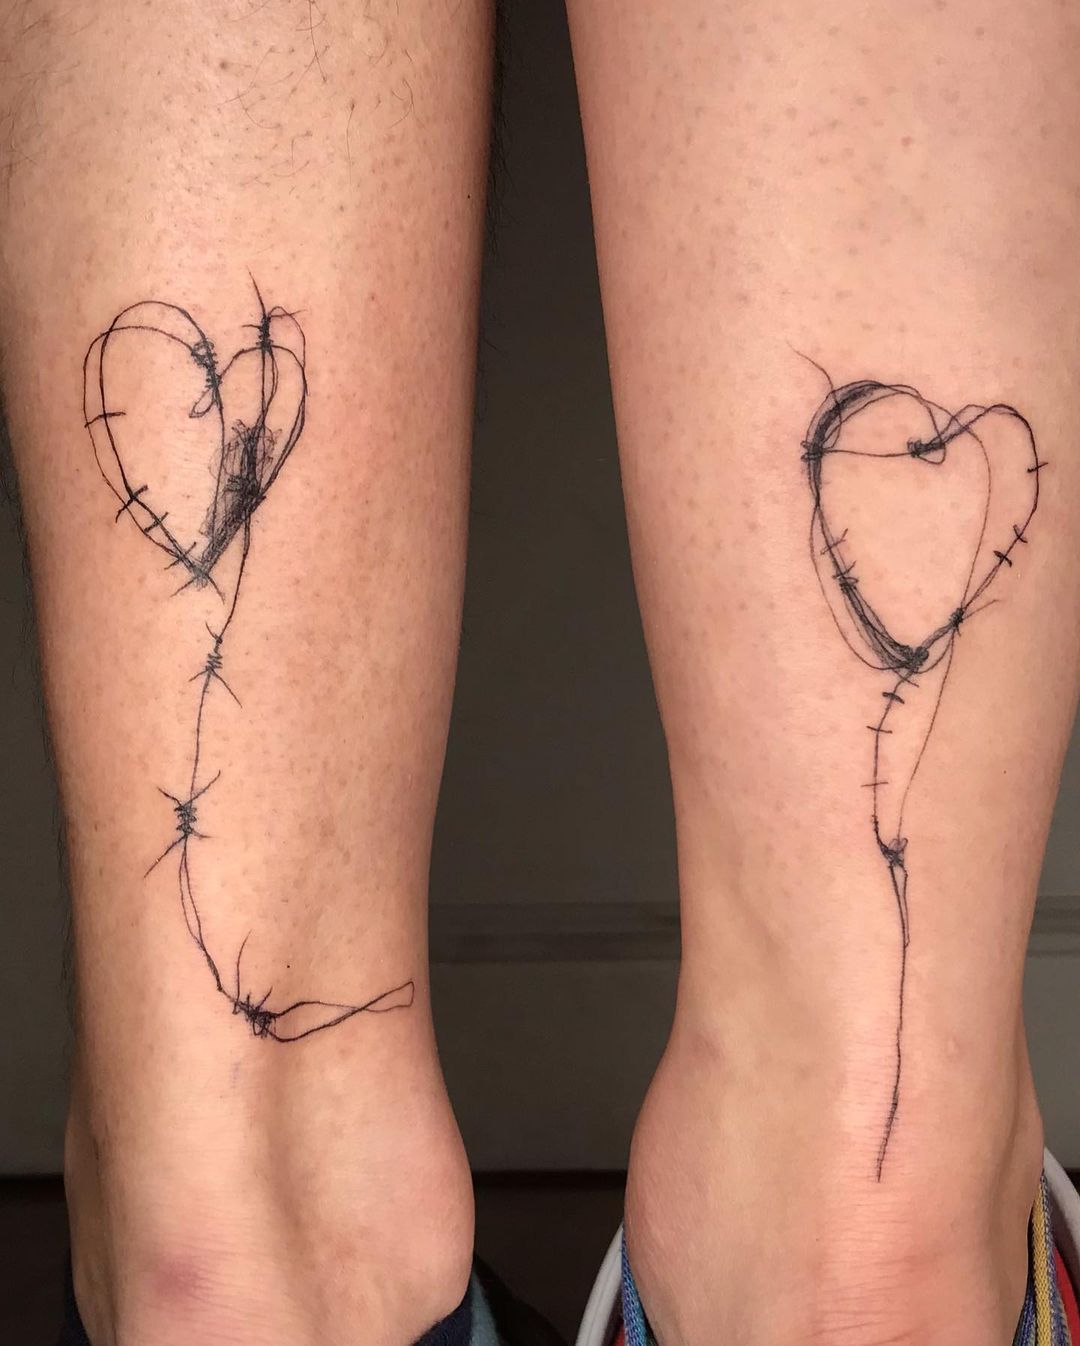 50 Matching Couple Tattoo Ideas To Try with Your Significant Other  